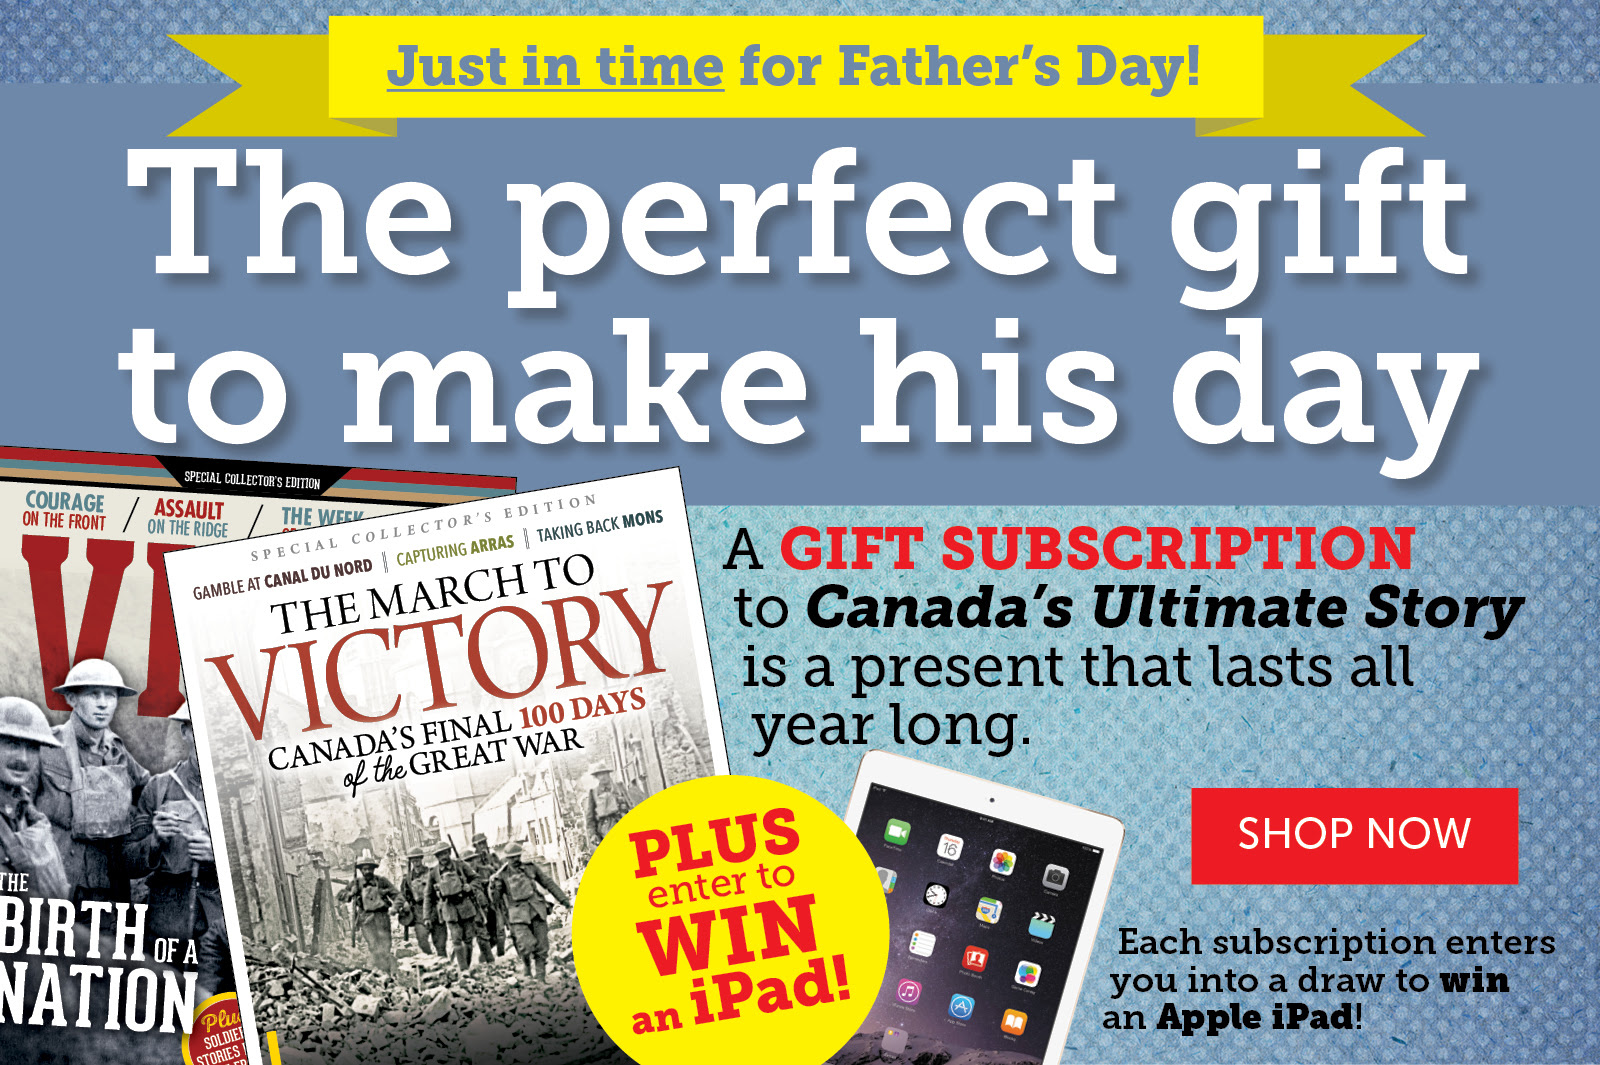 Get dad a gift subscription to Canada‘s Ultimate Story!